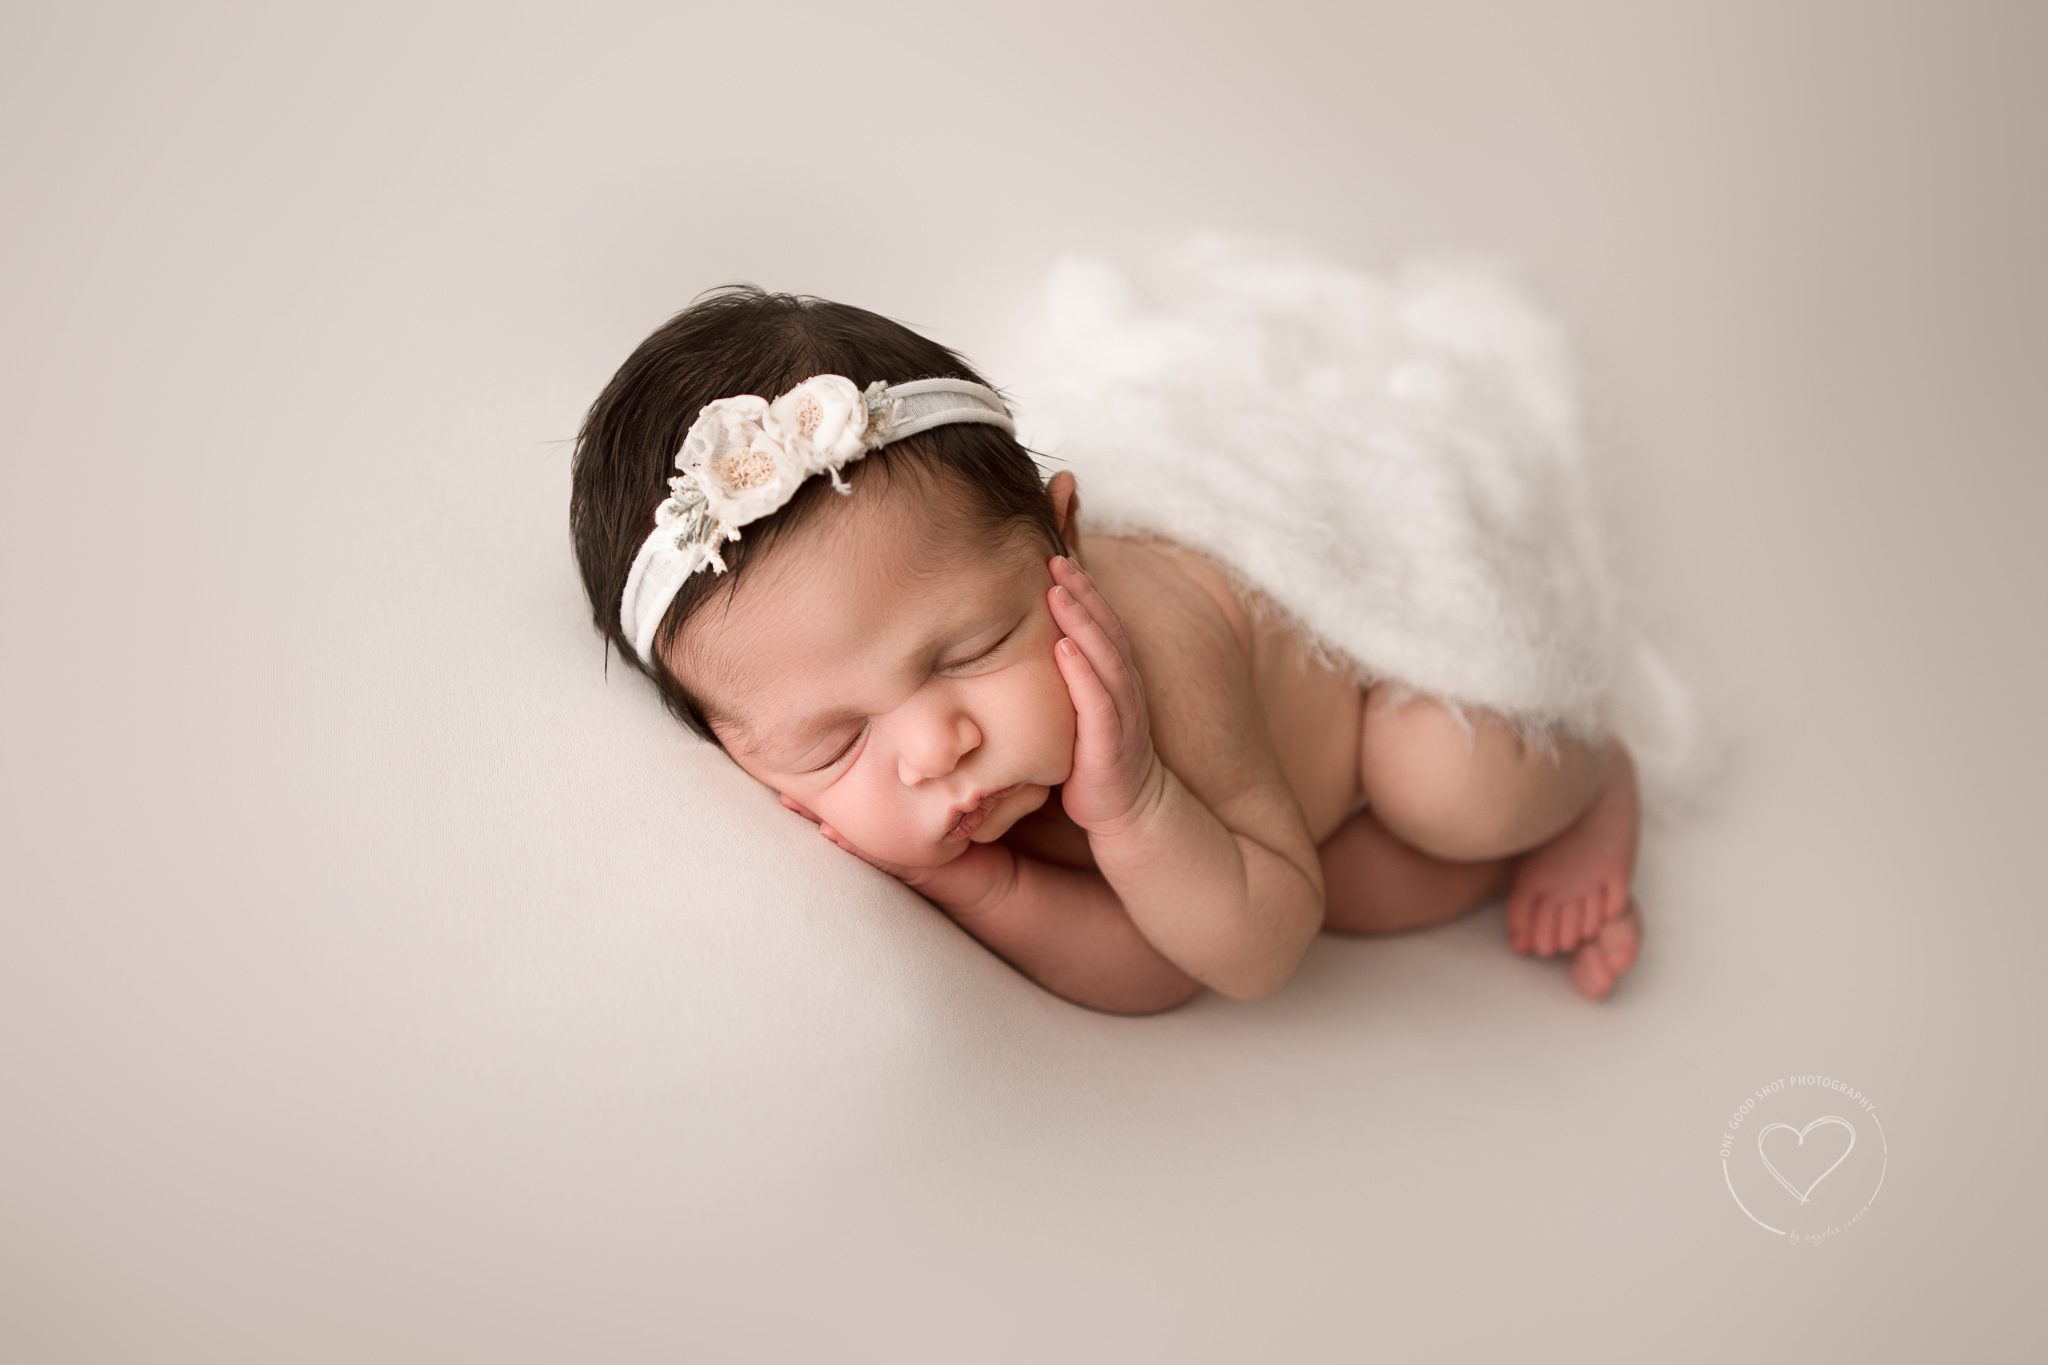 newborn girl photo, side lying pose, hands cupping face, neutrals, whites, fresno, clovis, photographer